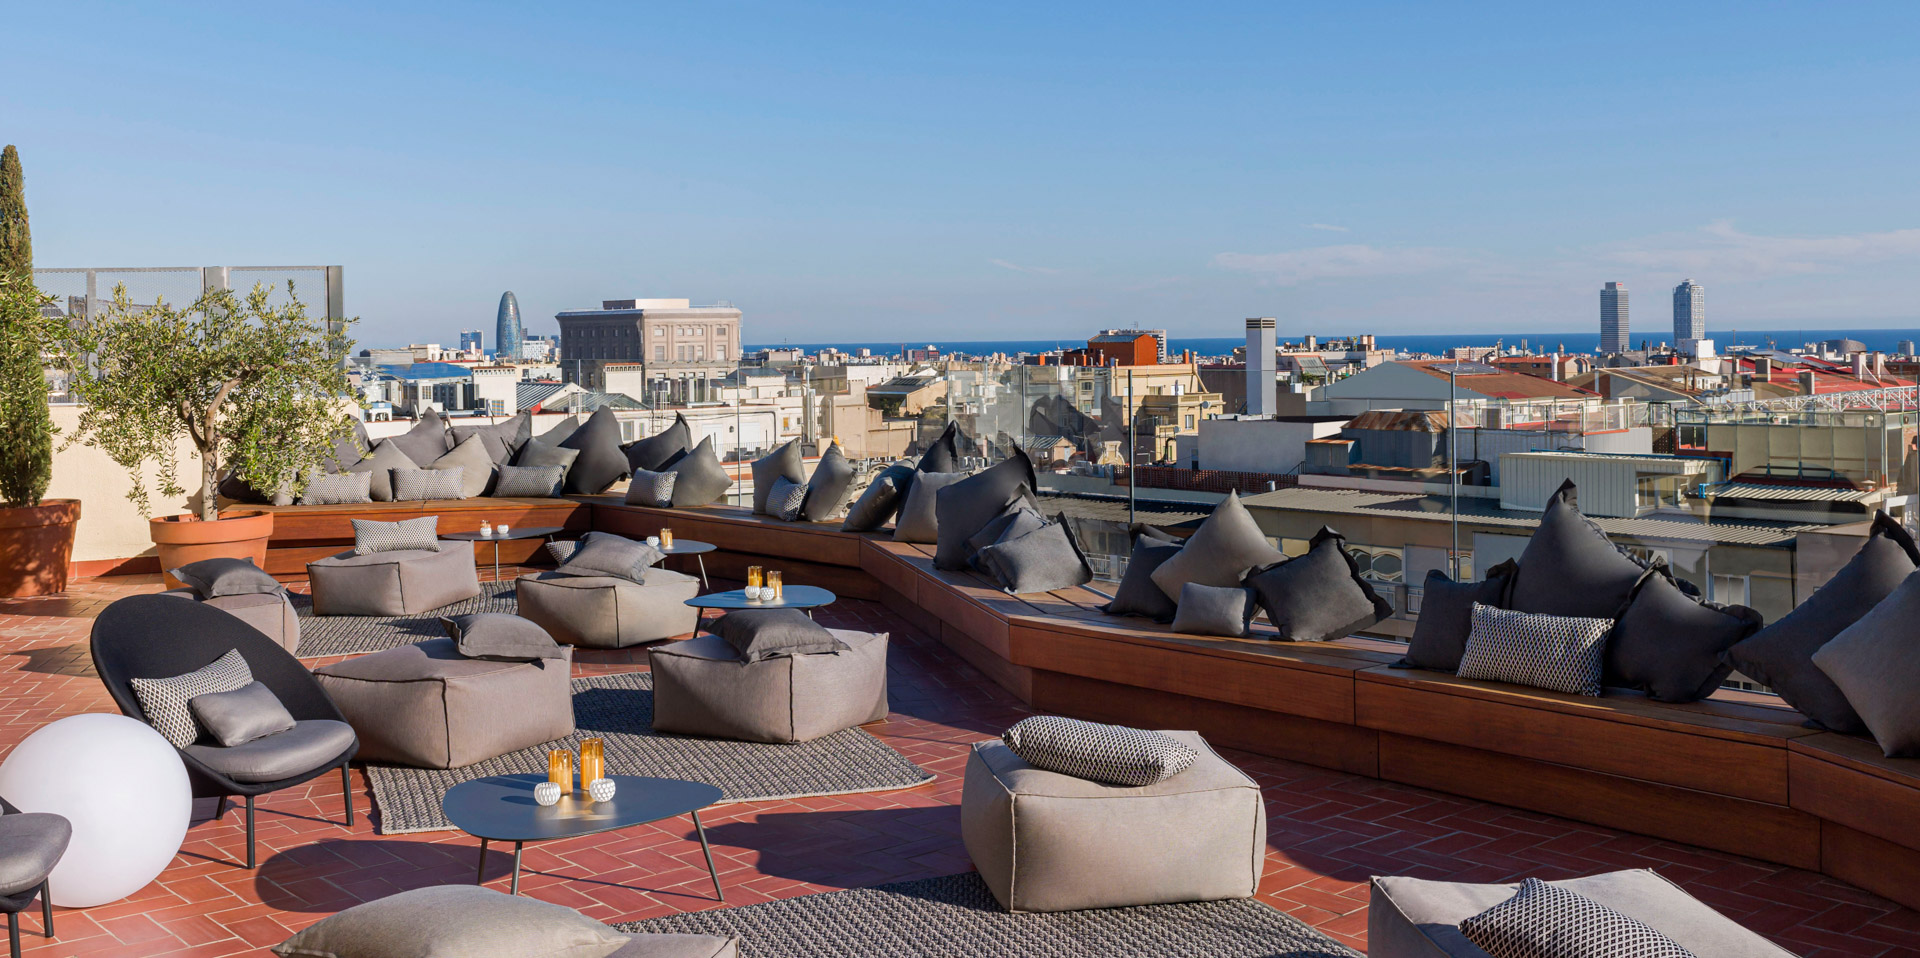 Lounge set-up on the rooftop terrace facing the sea in barcelona